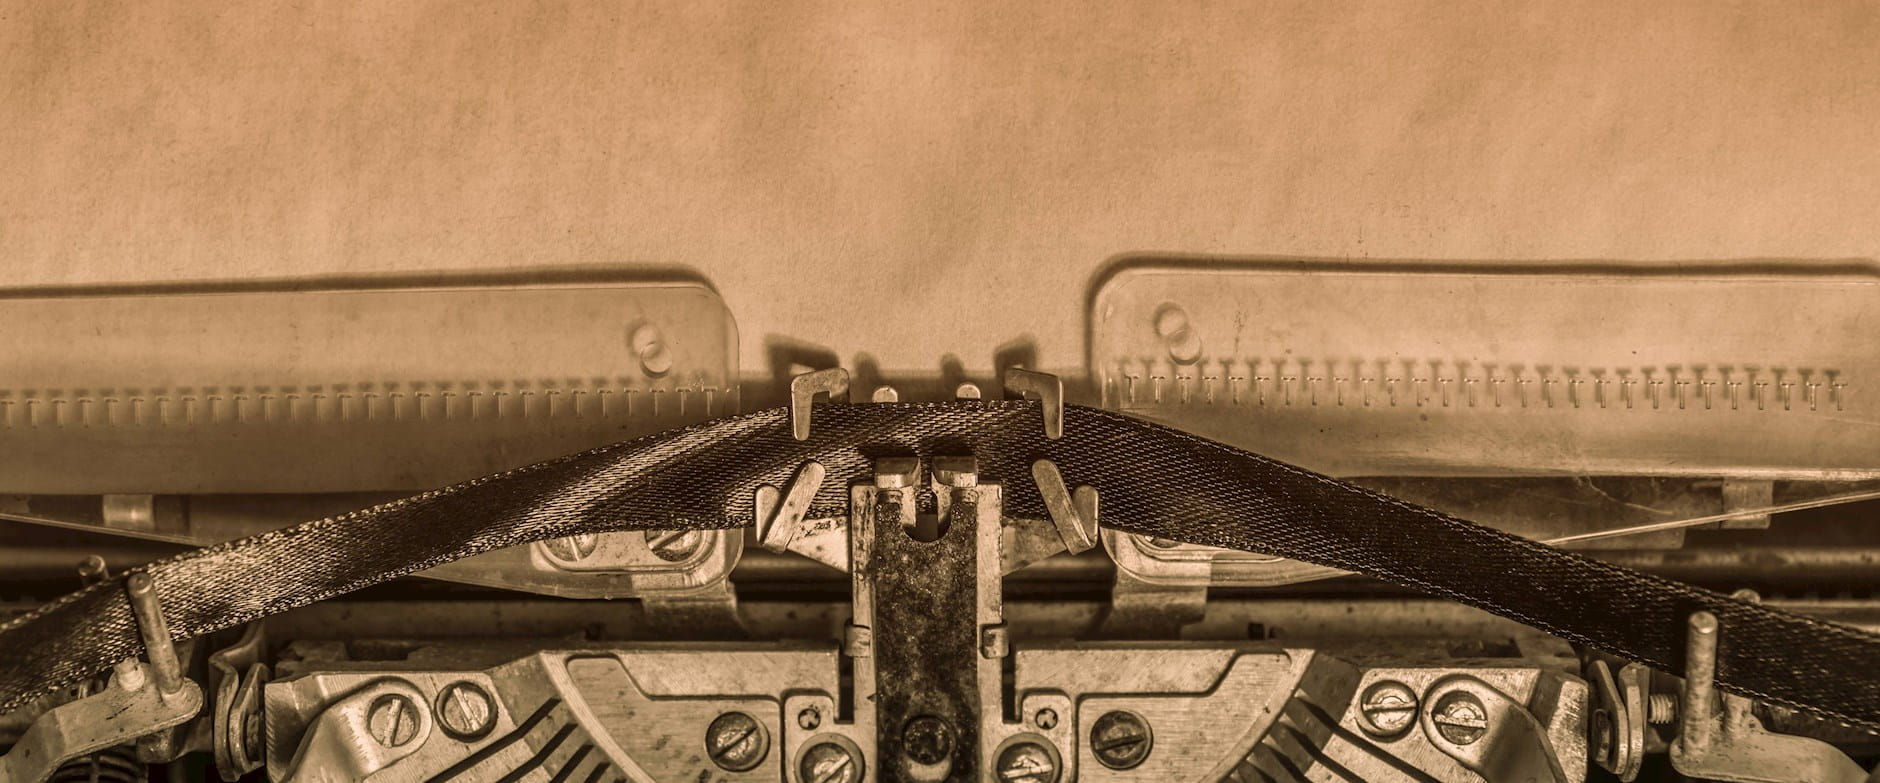 Closeup of a typewriter with old paper in the background